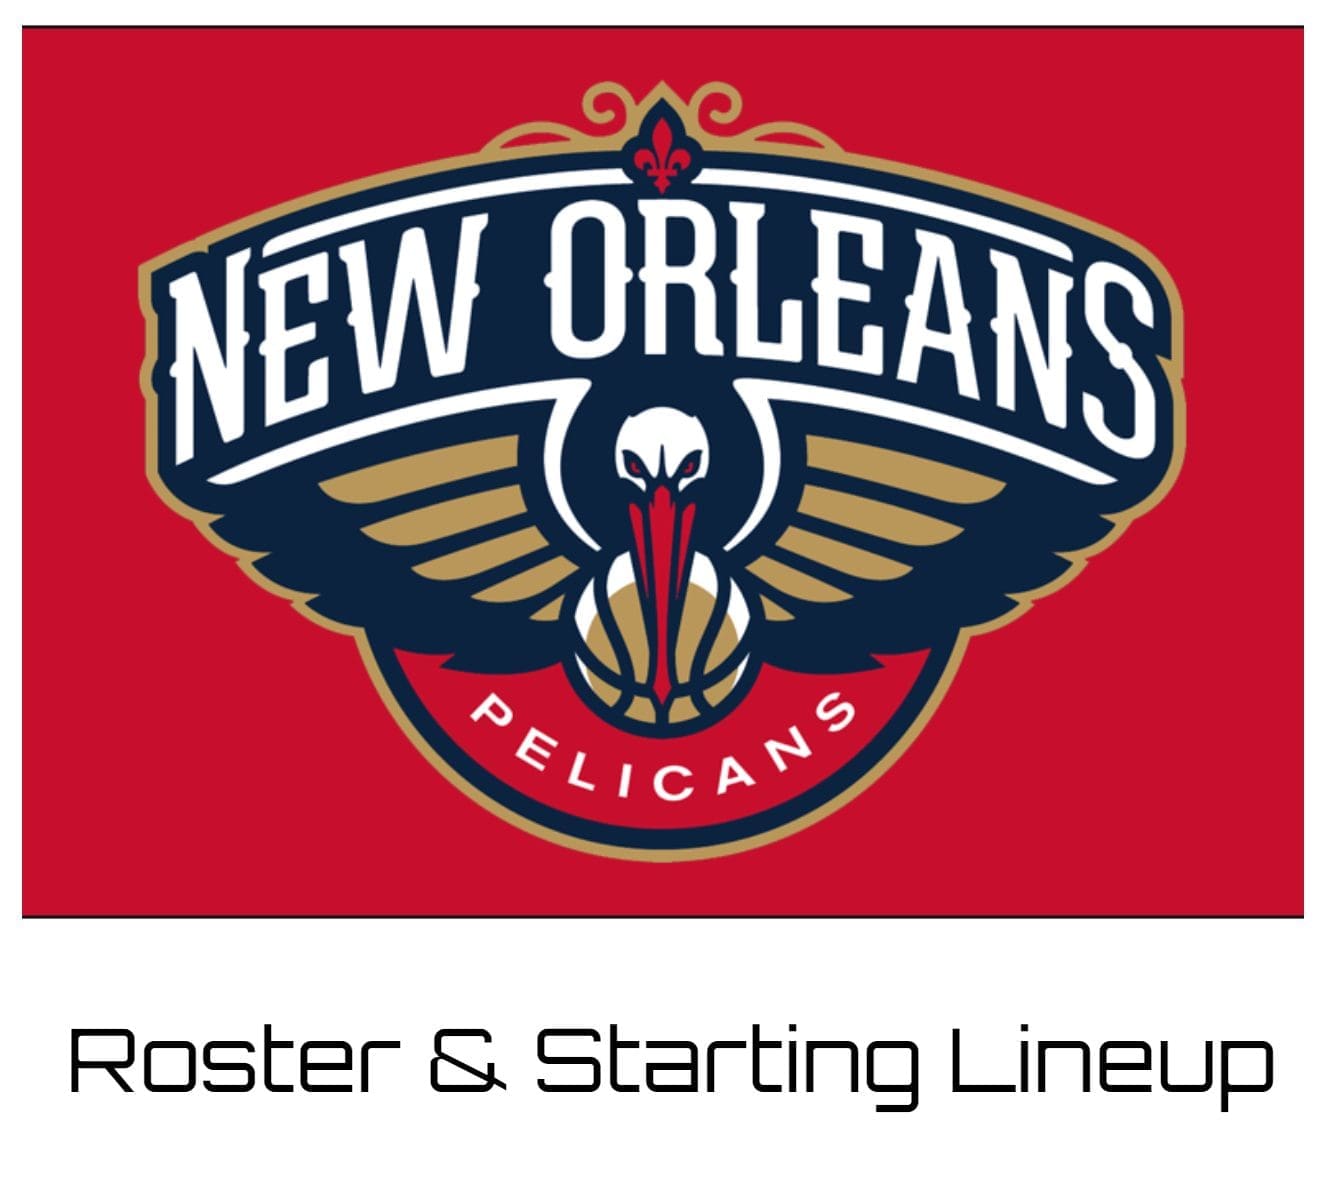 New Orleans Pelicans Roster